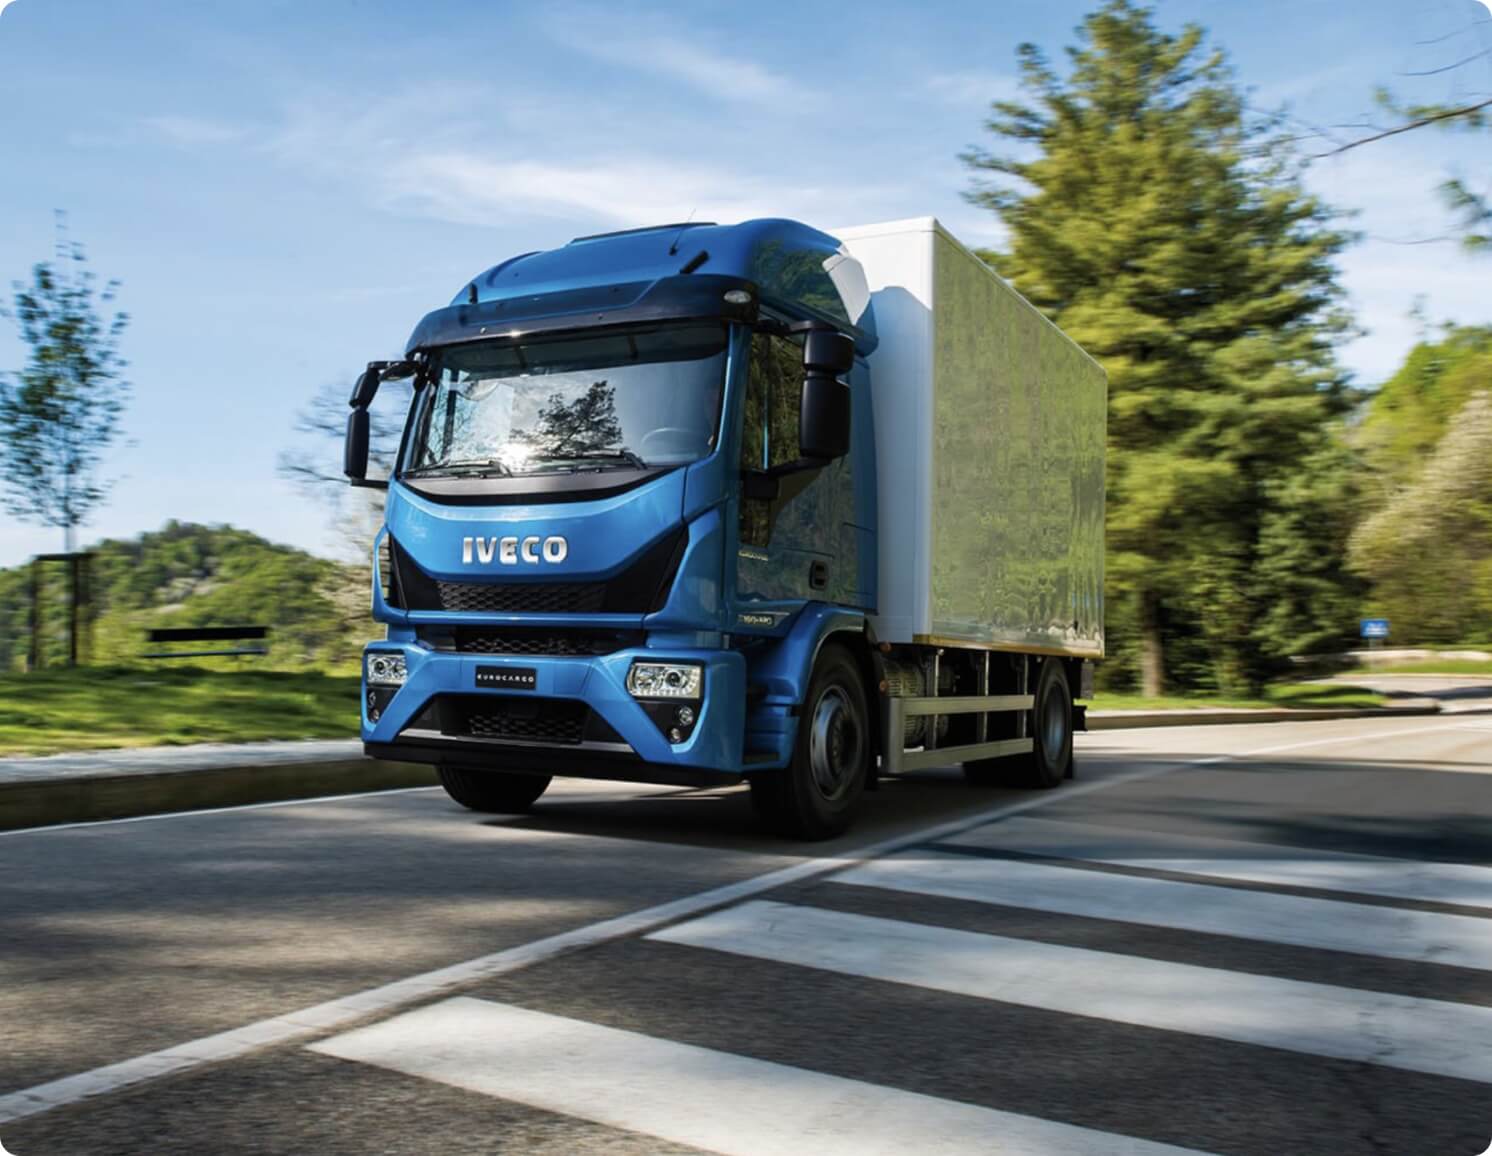 IVECO Eurocargo driving down the road